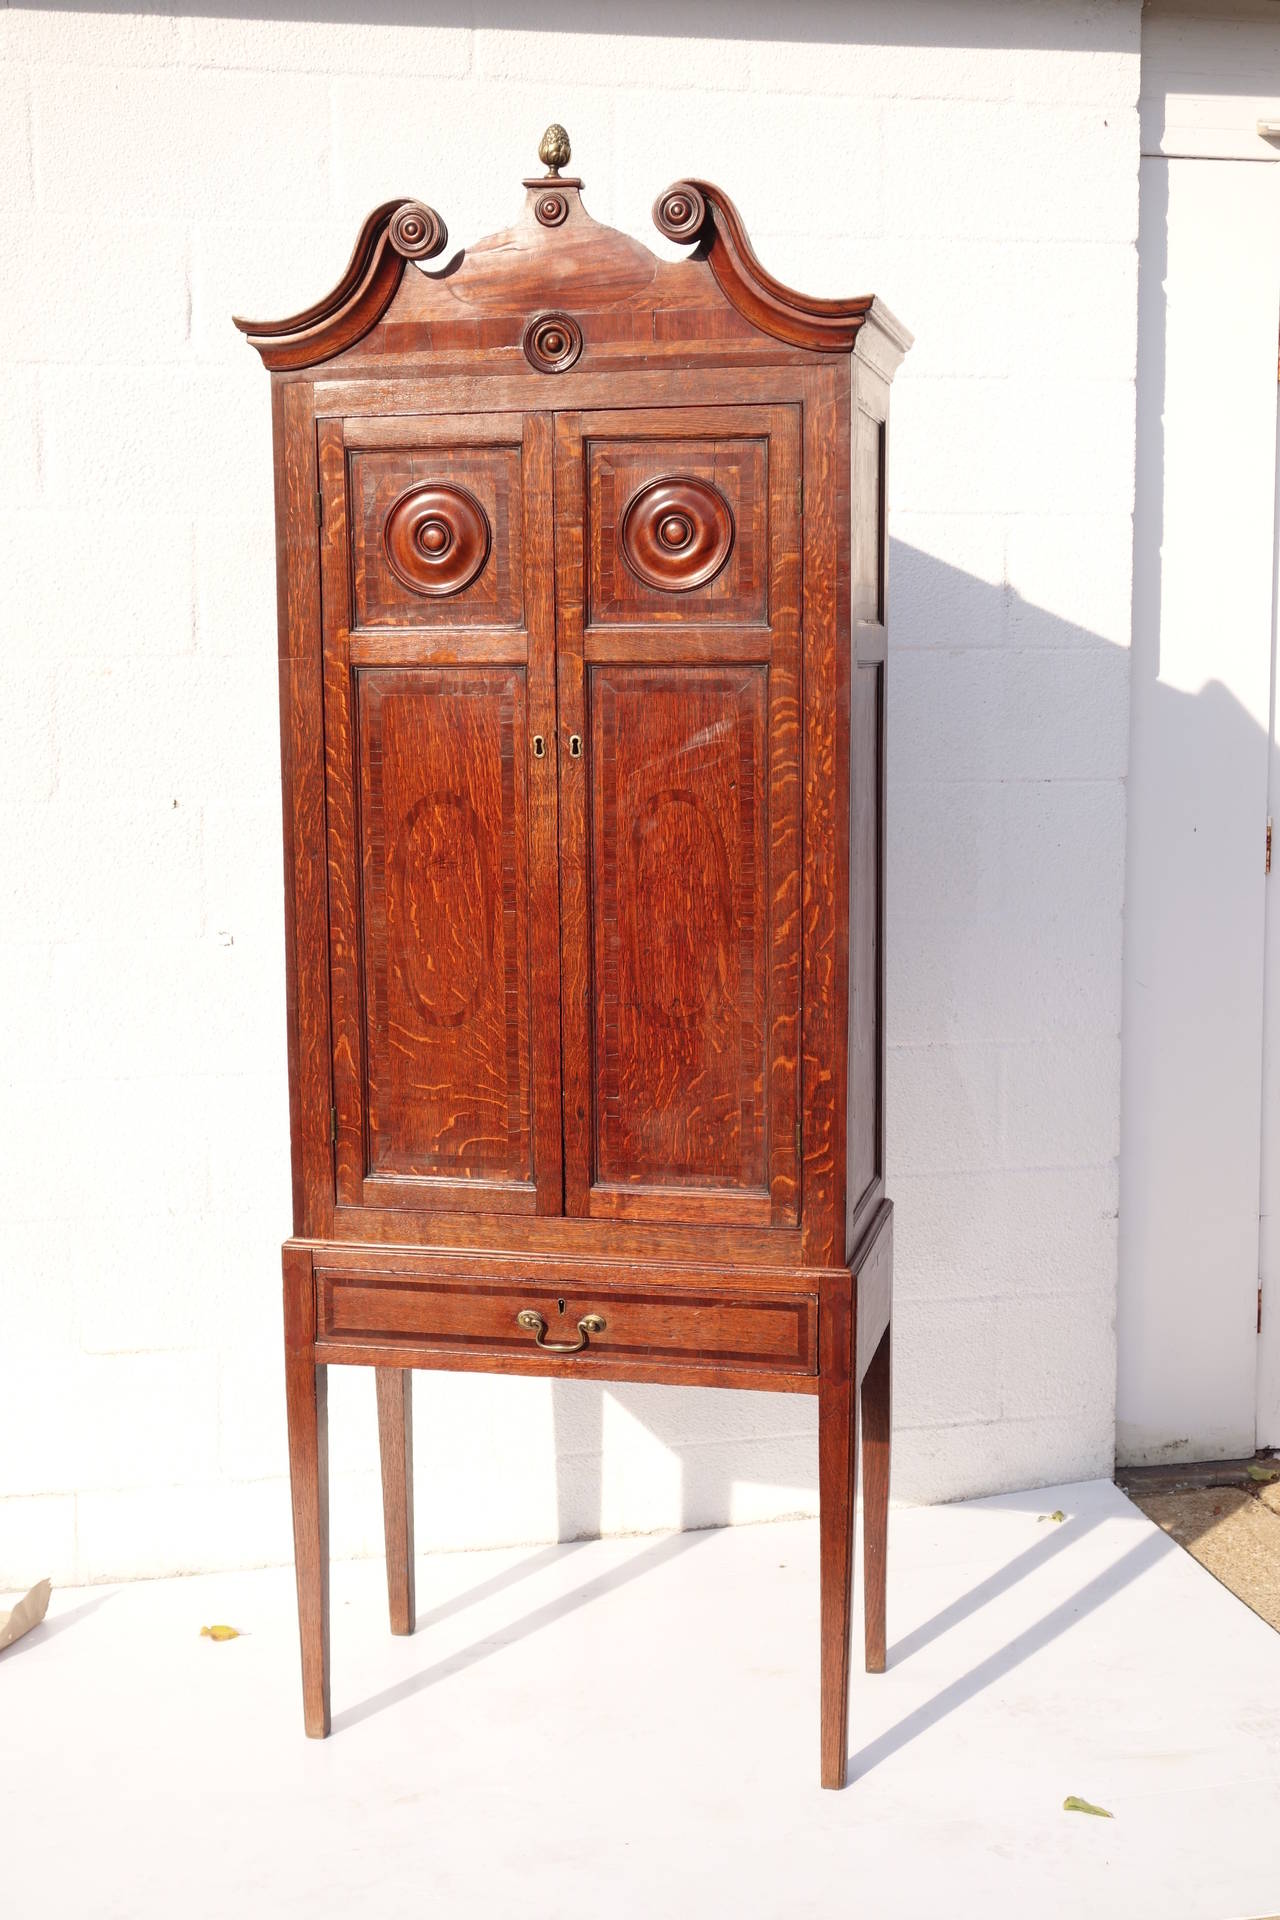 Unusual Hepplewhite style or late Georgian style cabinet with carved cornice, brass artichoke cornice piece, two inlaid cabinet doors, one lower drawer, raised on tapering square legs. Please contact for current availability.